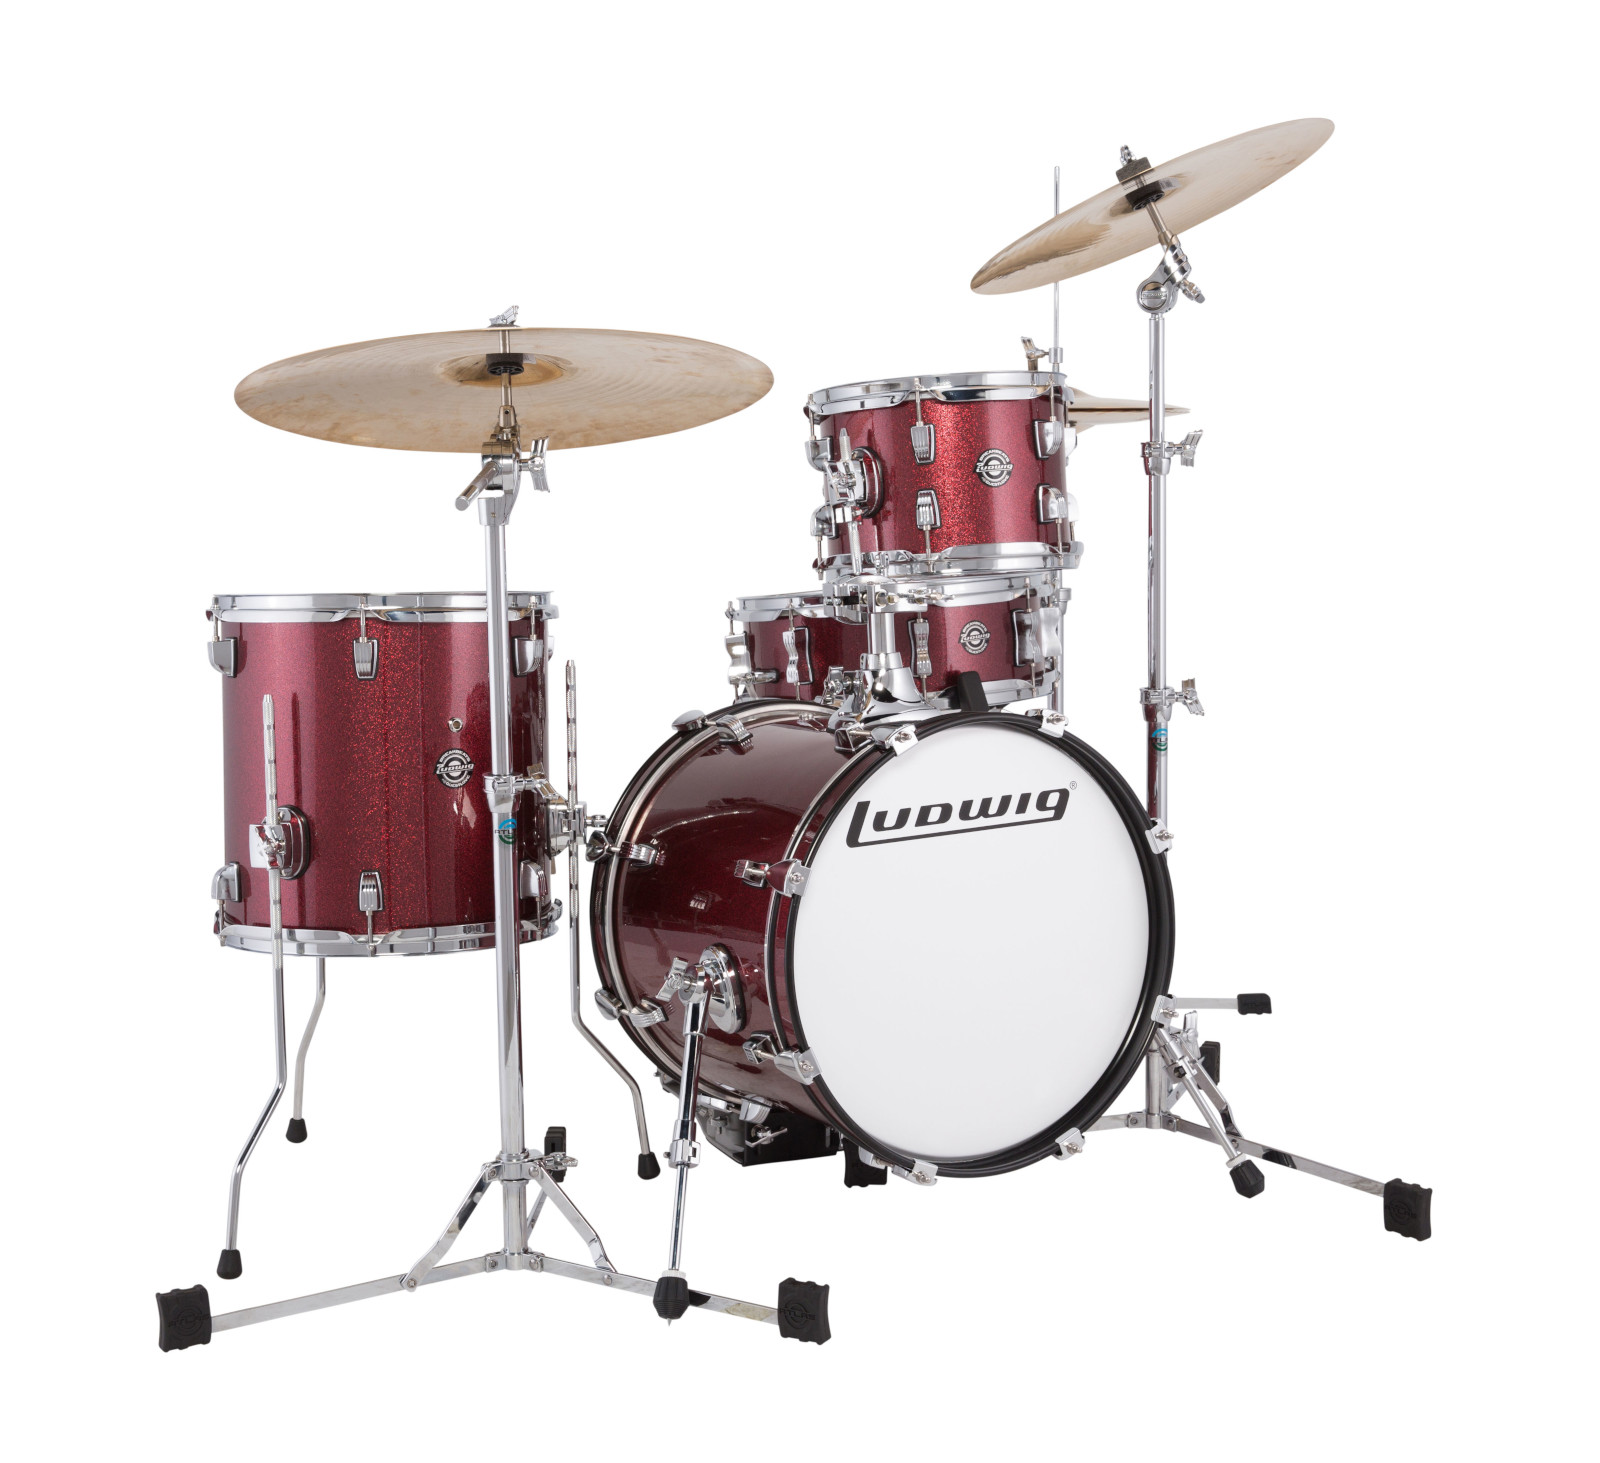 LUDWIG DRUMS LC179XX025 - KIT BREAKBEATS QUESTLOVE RED BROWN SPARKLE